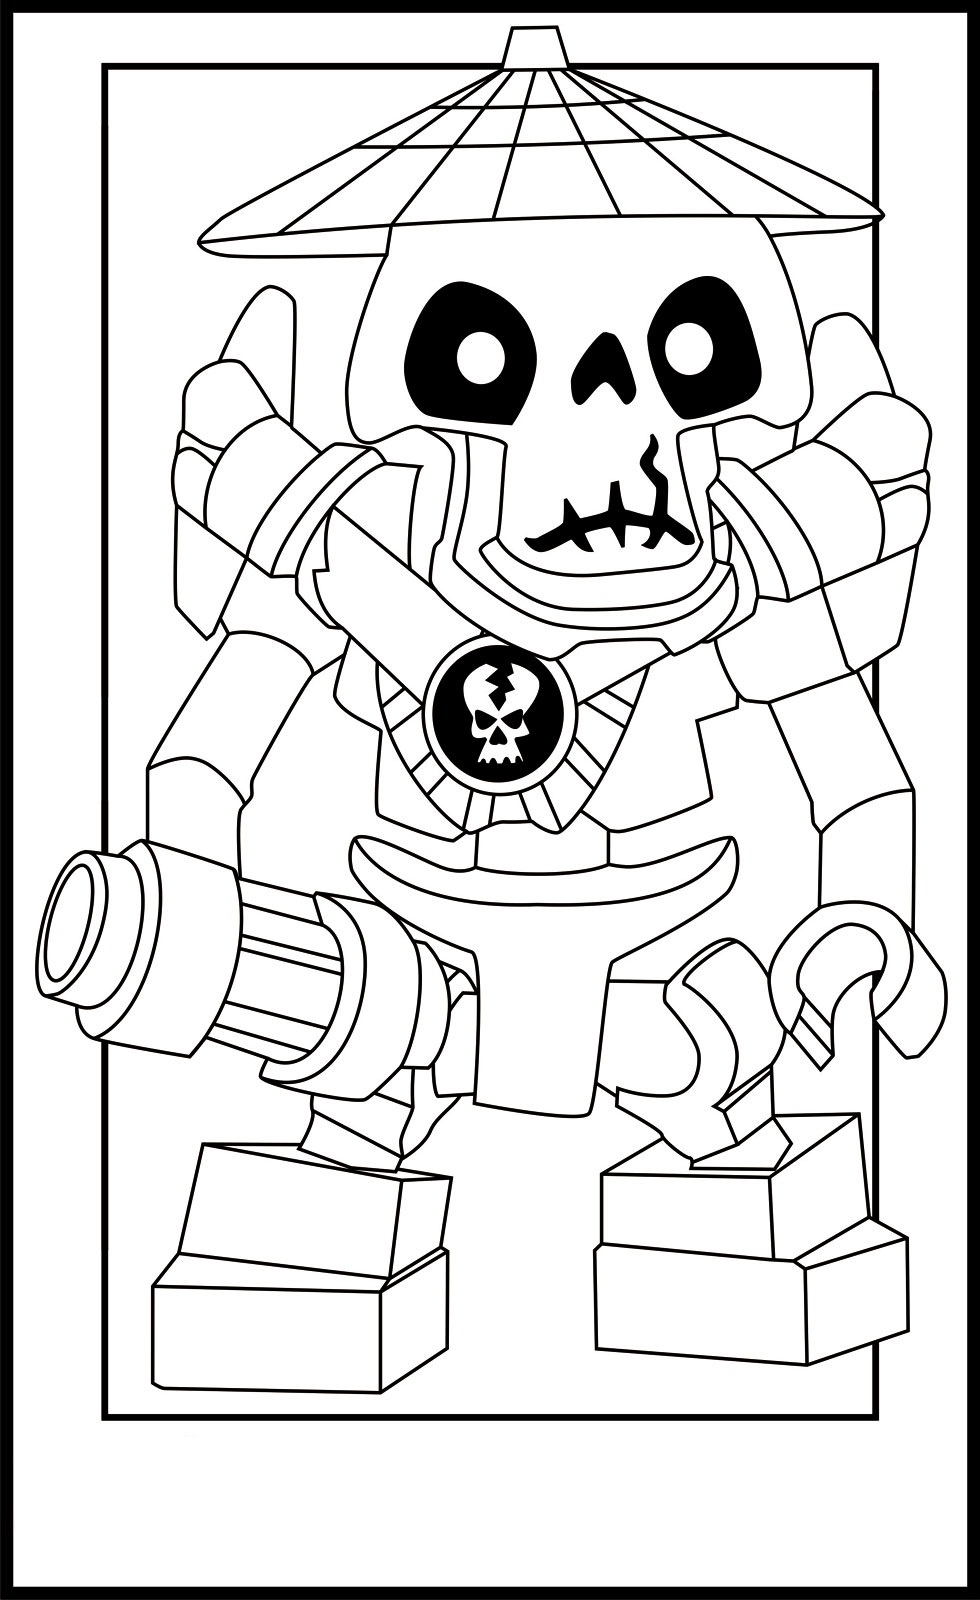 lego-ninjago-coloring-pages-free-at-getcolorings-free-printable-colorings-pages-to-print